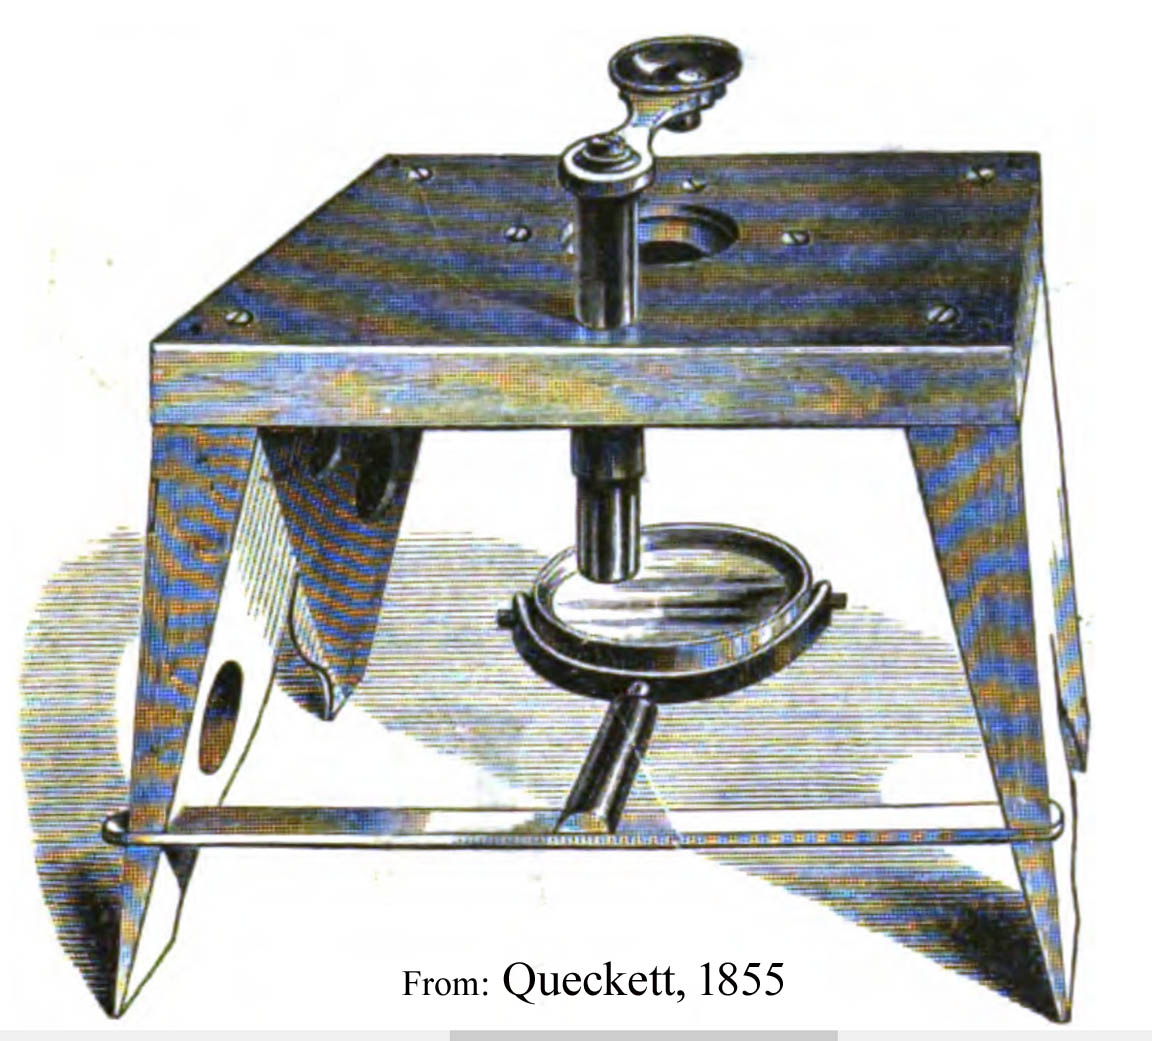 Engraving from Queckett, 1855